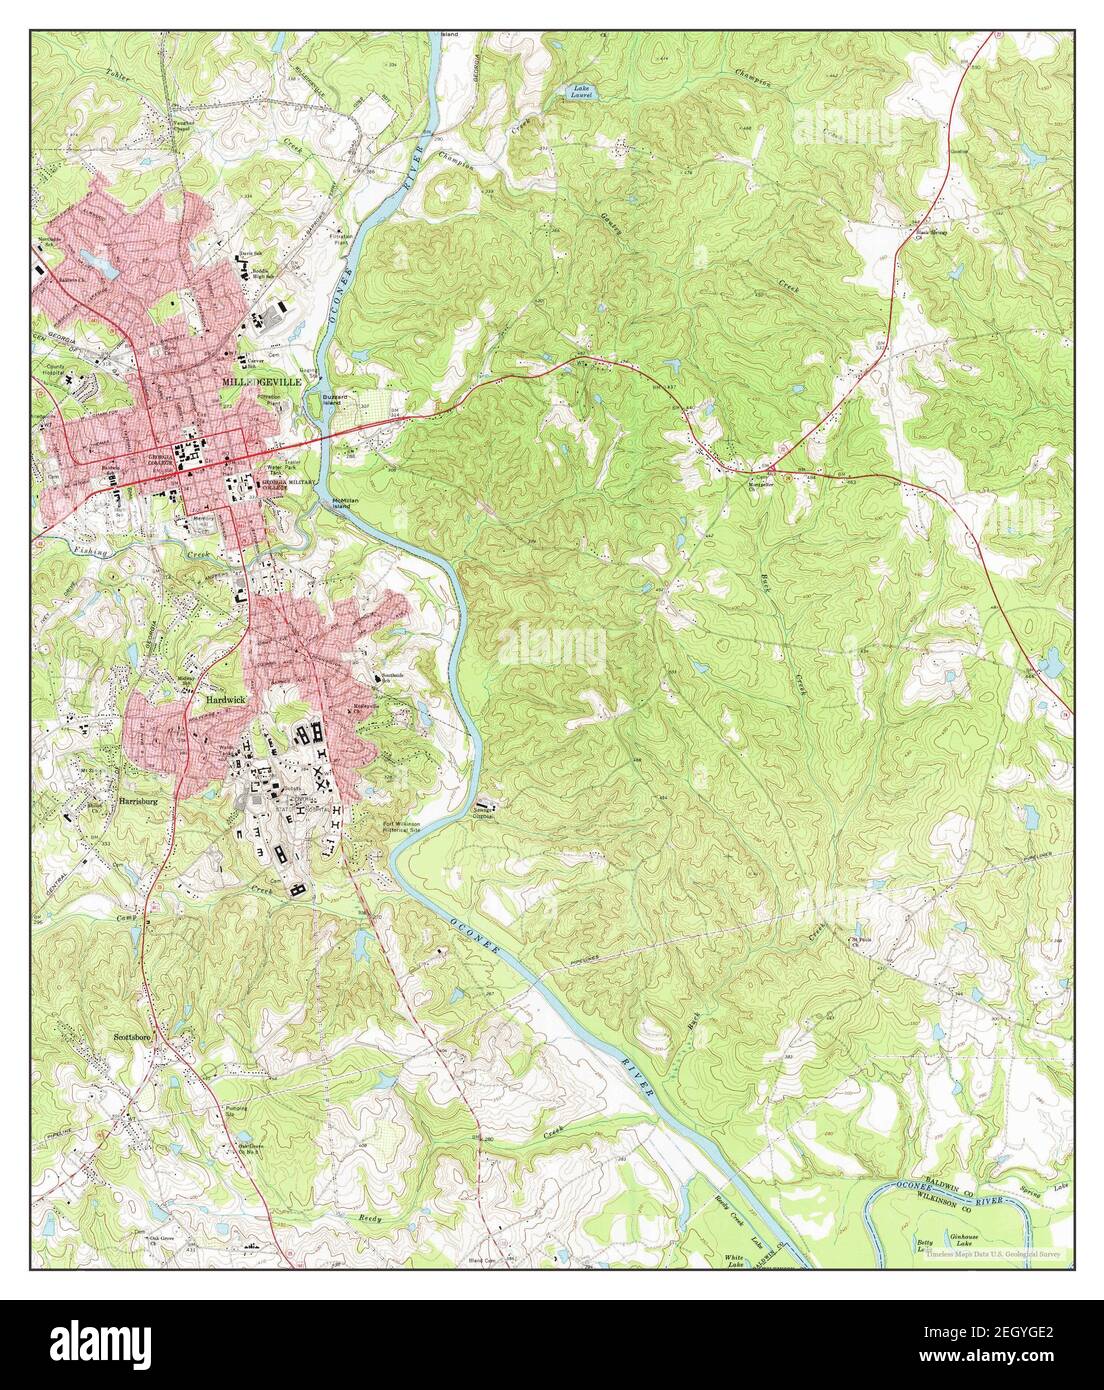 Milledgeville, Georgia, map 1972, 1:24000, United States of America by Timeless Maps, data U.S. Geological Survey Stock Photo